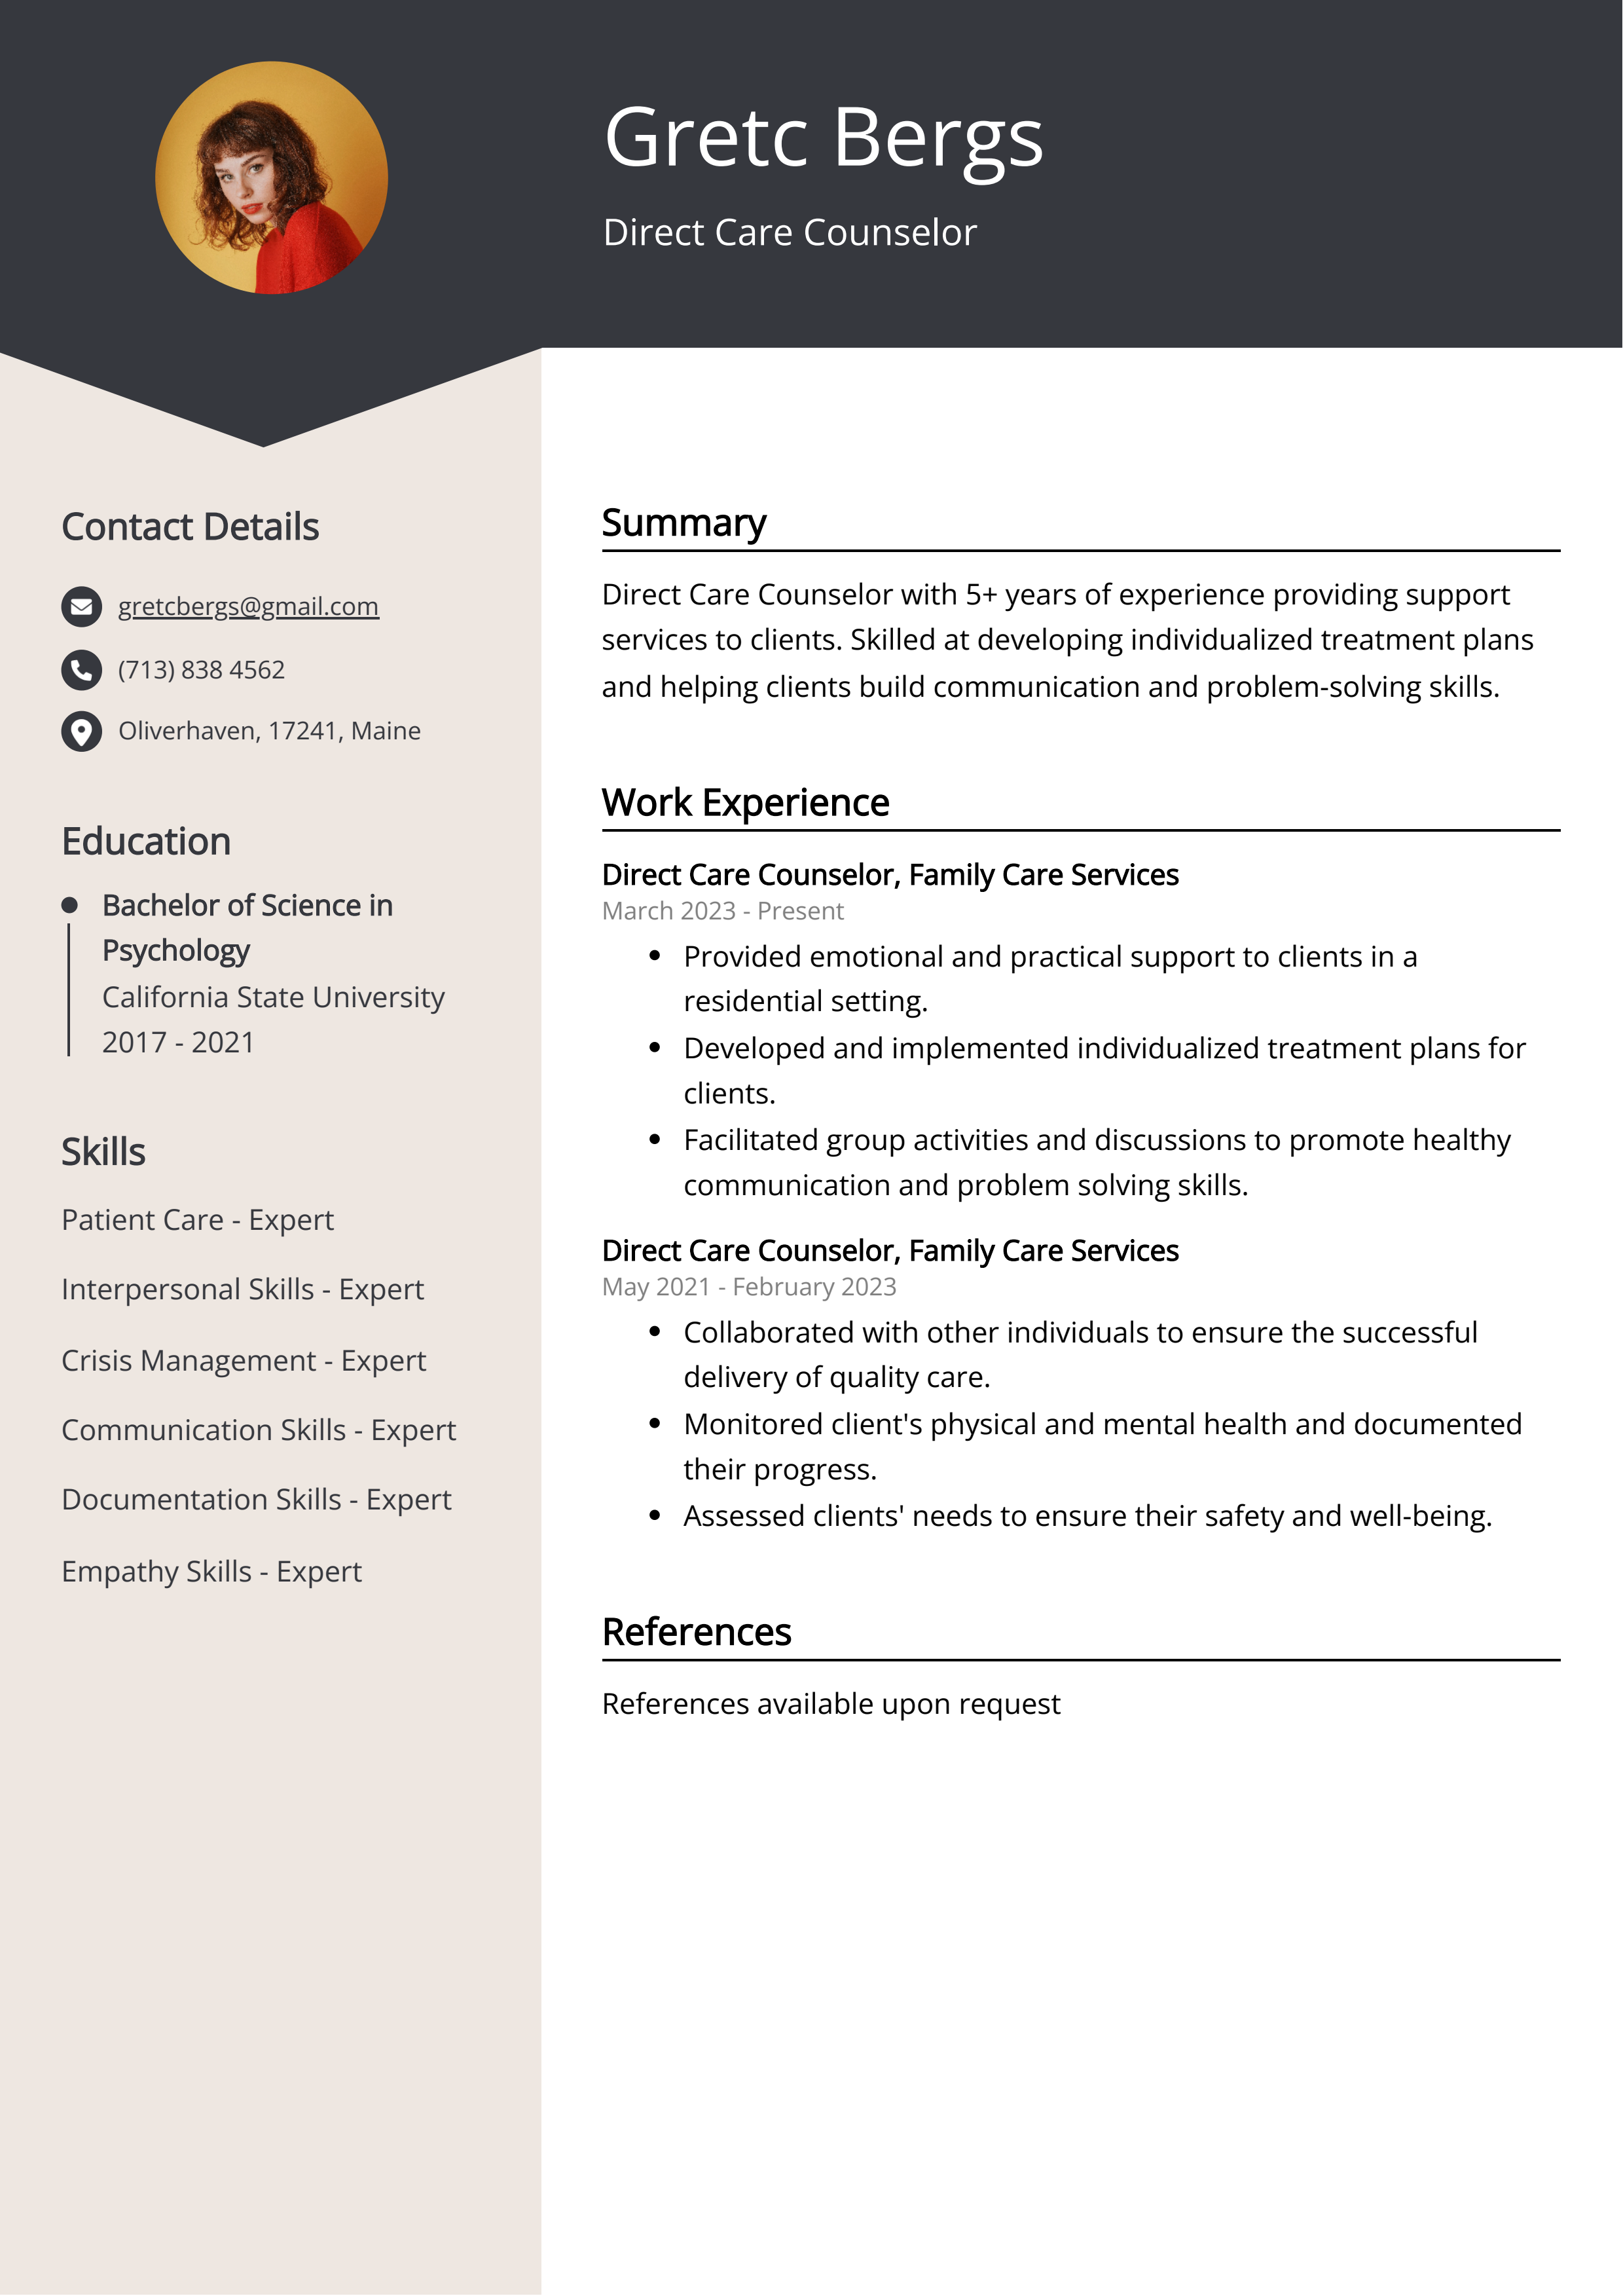 Direct Care Counselor Resume Example